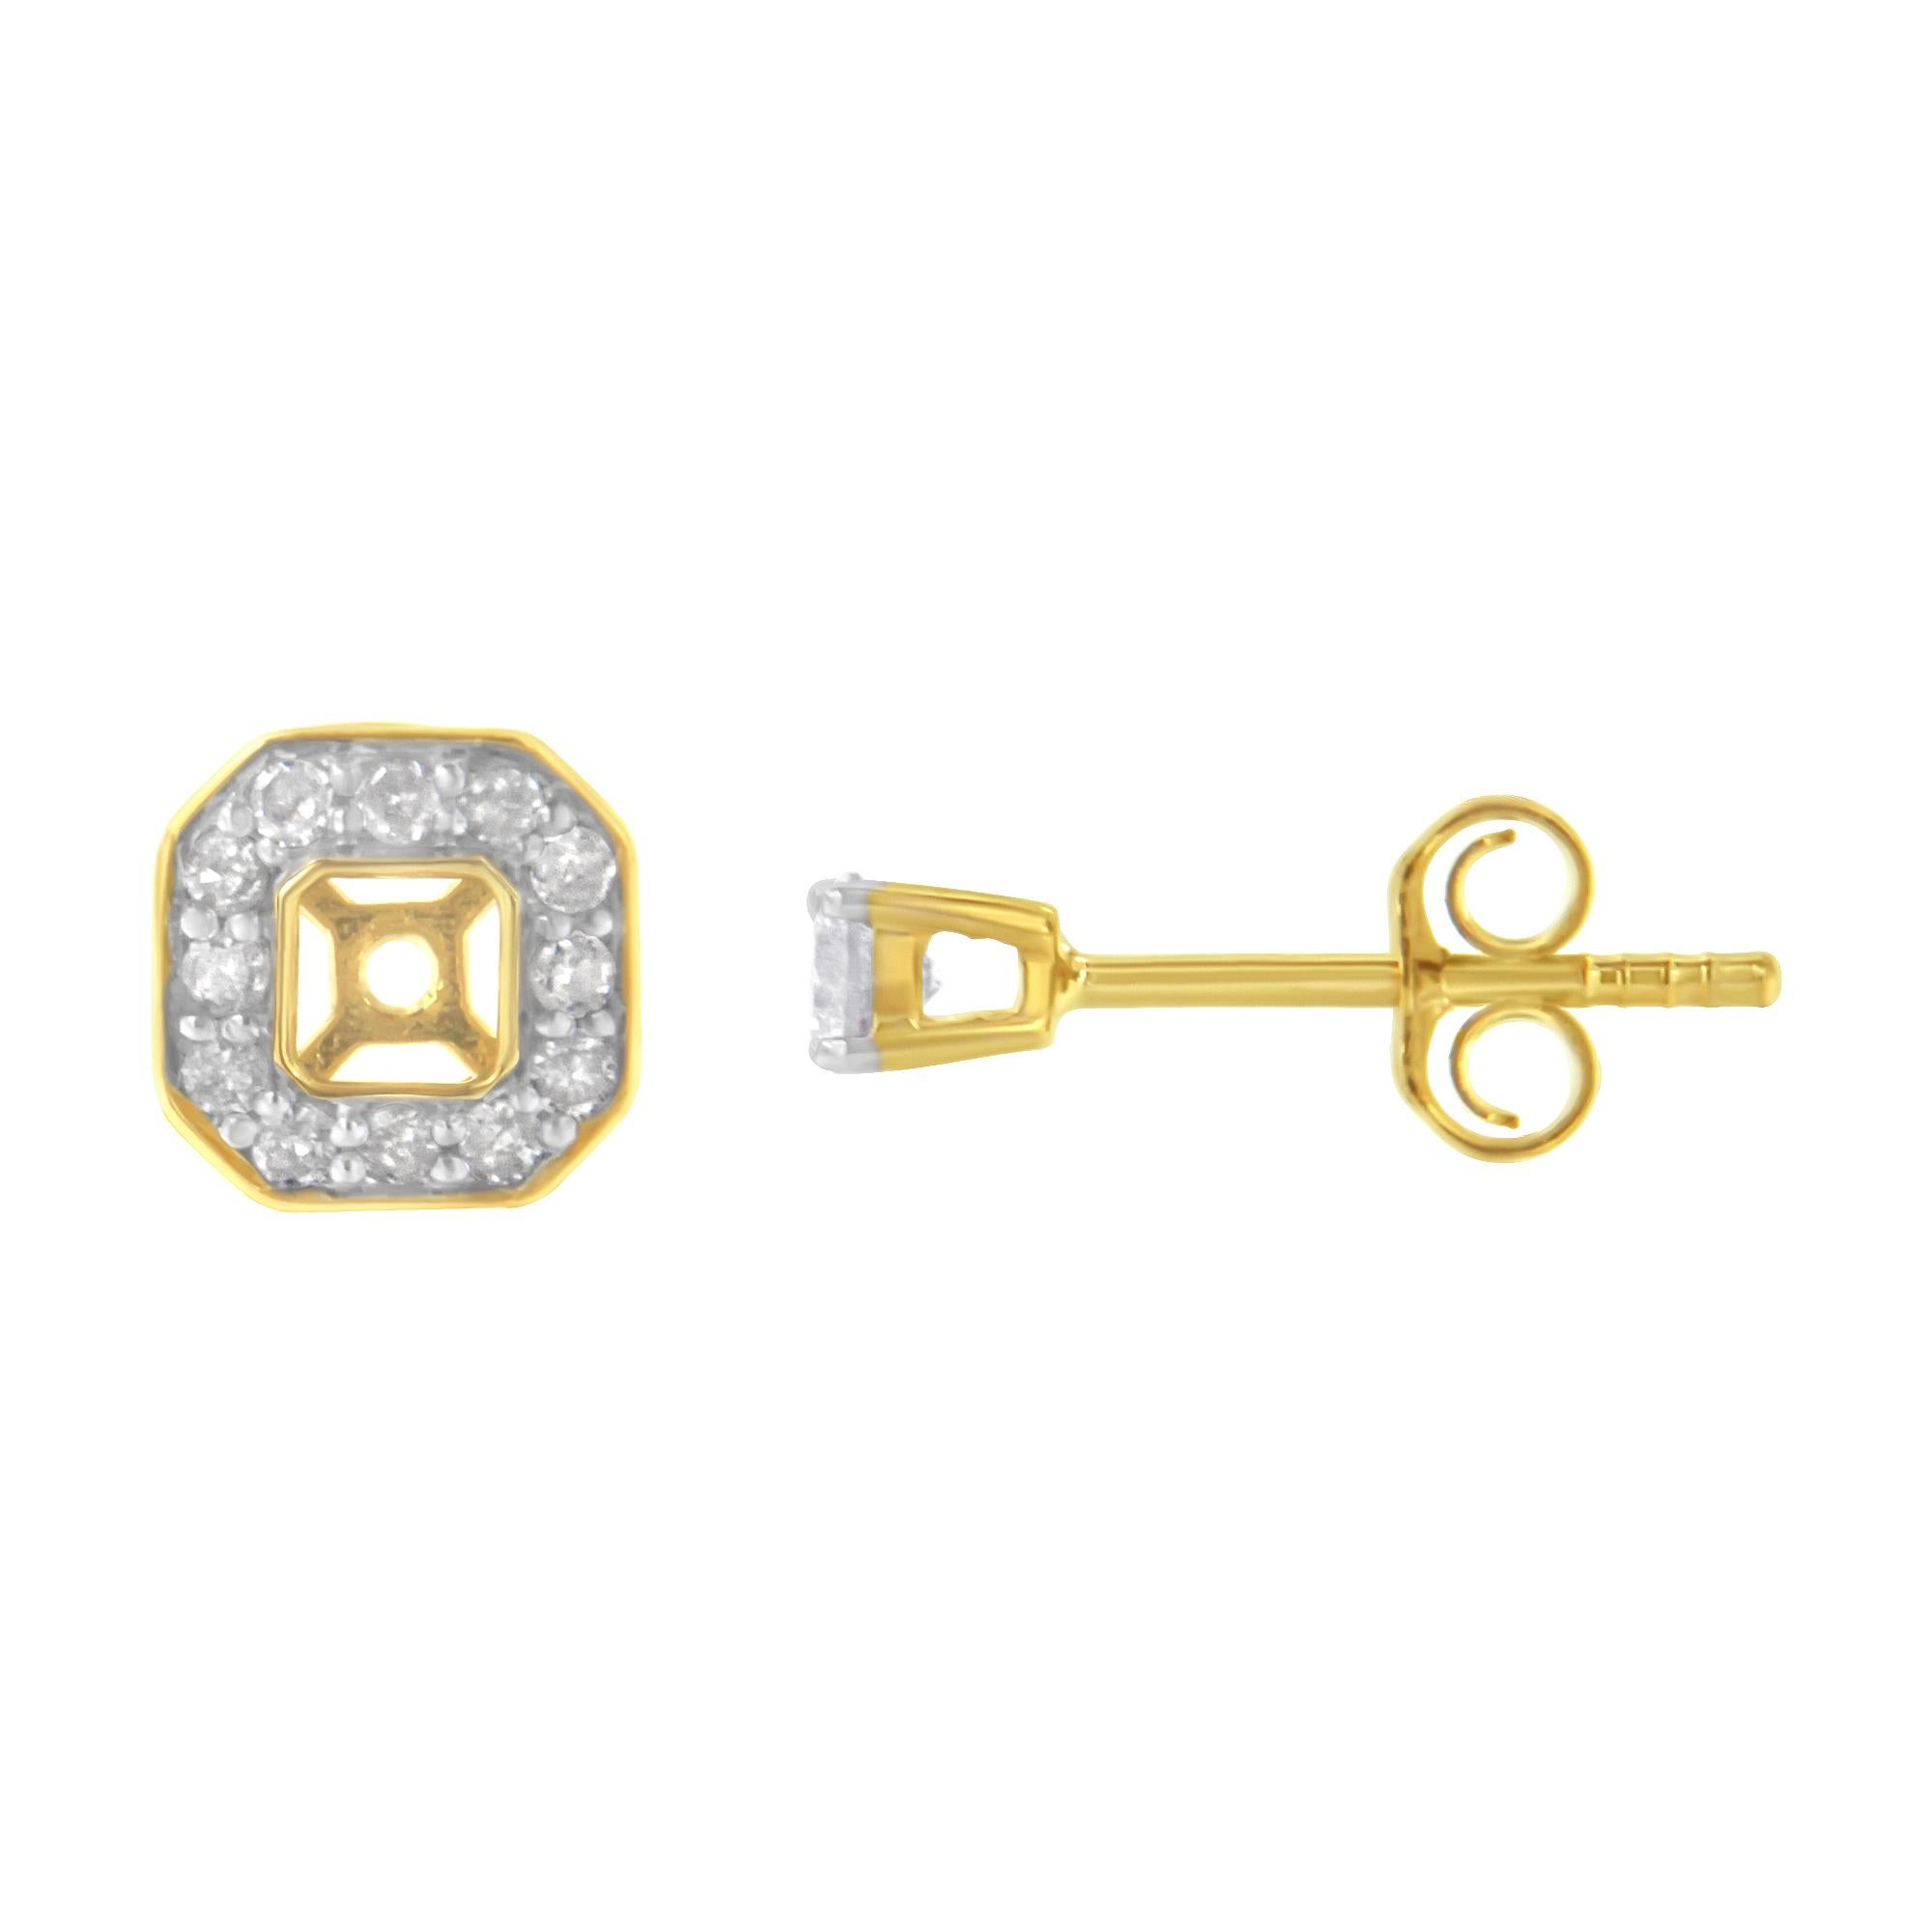 A pair of square diamond stud earrings that features central round brilliant cut diamonds surrounded by a squared halo of diamonds. Crafted in 2 Micron 10 karat yellow gold plated sterling silver, this elegant design has a total diamond weight of